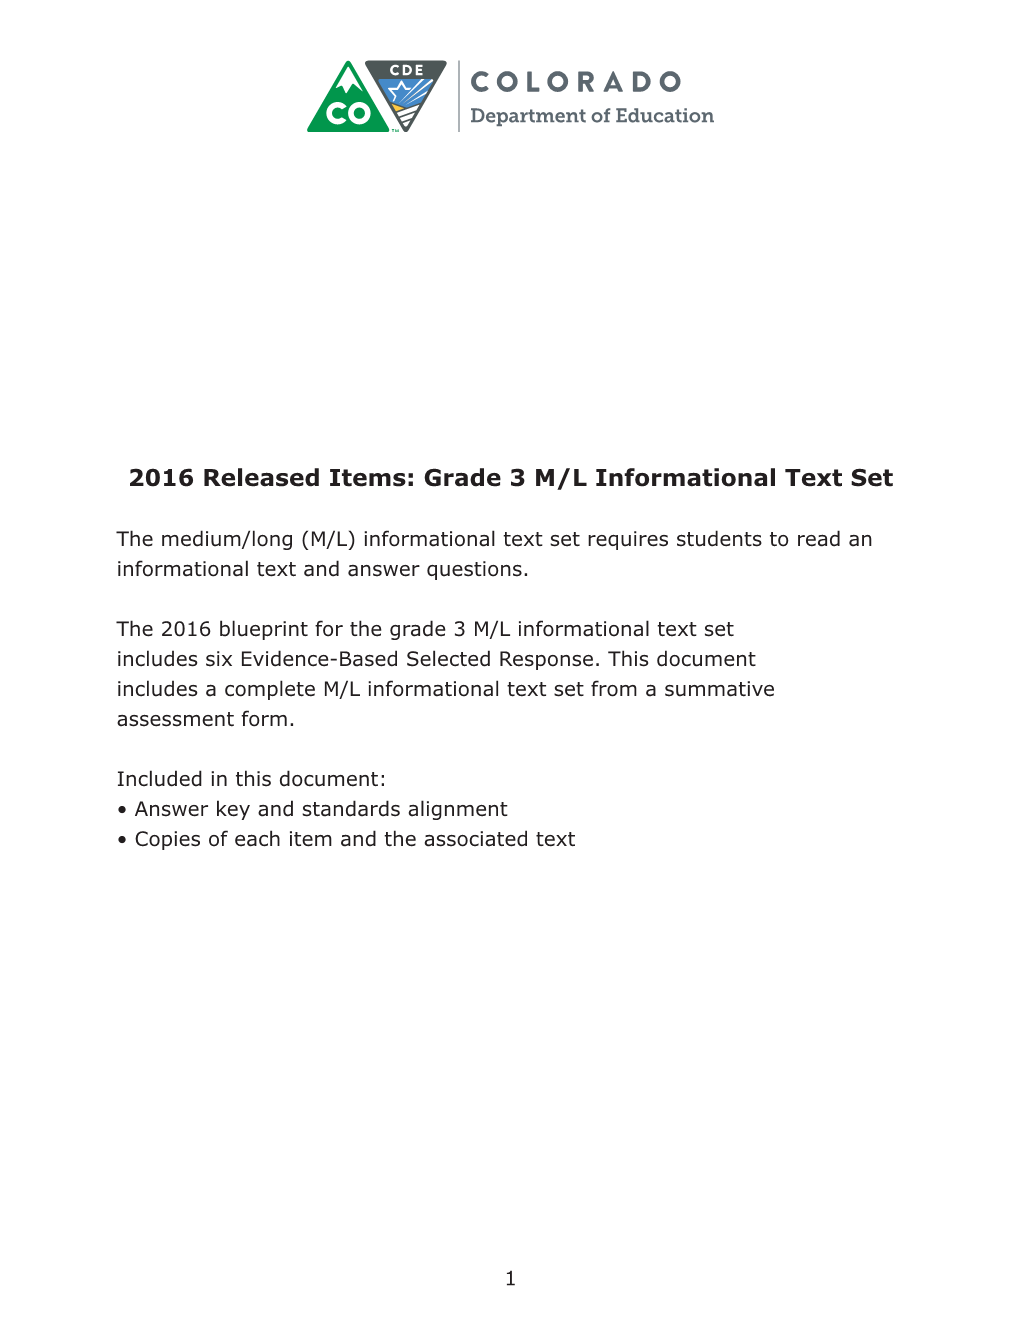 2016 Released Items: Grade 3 M/L Informational Text Set